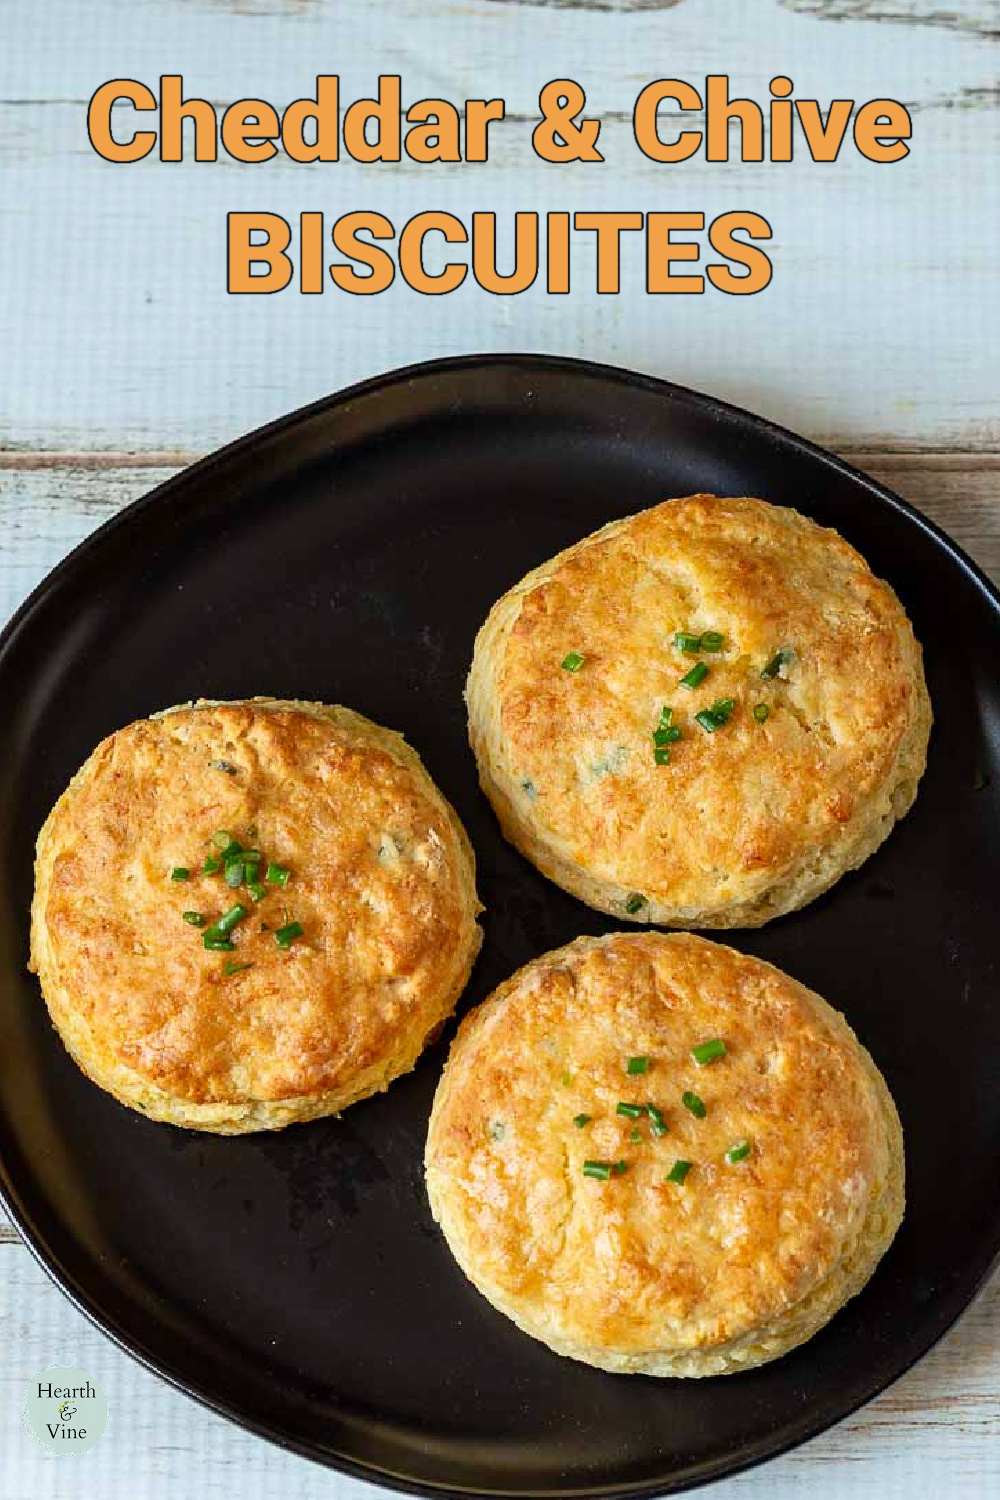 Three cheddar and chive biscuits on a plate.